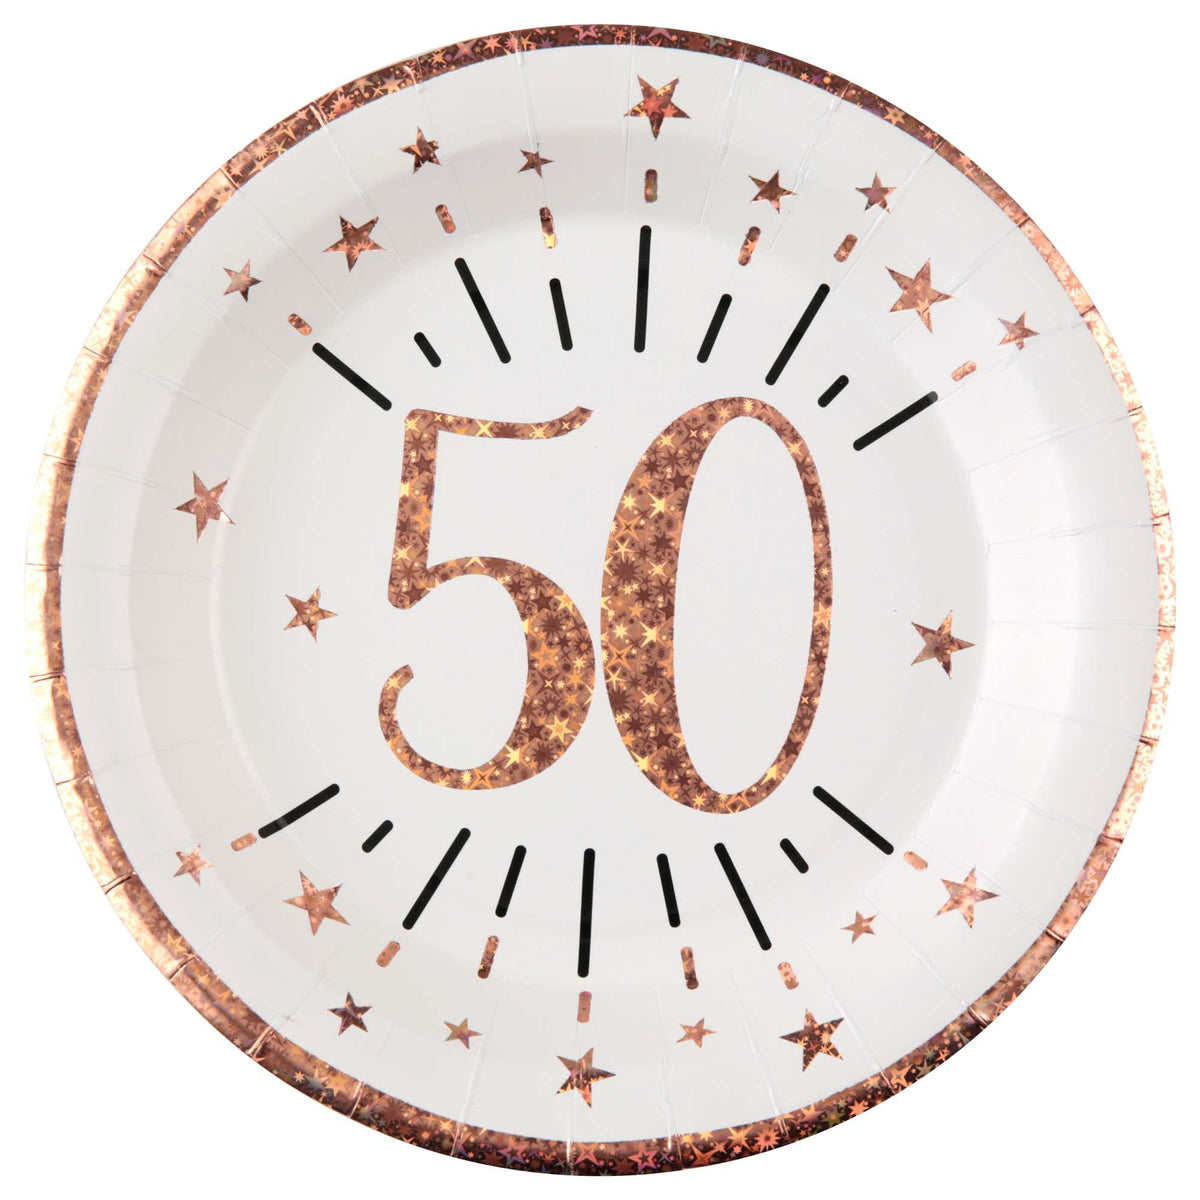 SANTEX Age Specific Birthday Rose Gold 50th Birthday Large Round Lunch Paper Plates, 9 Inches, 10 Count 3660380069867